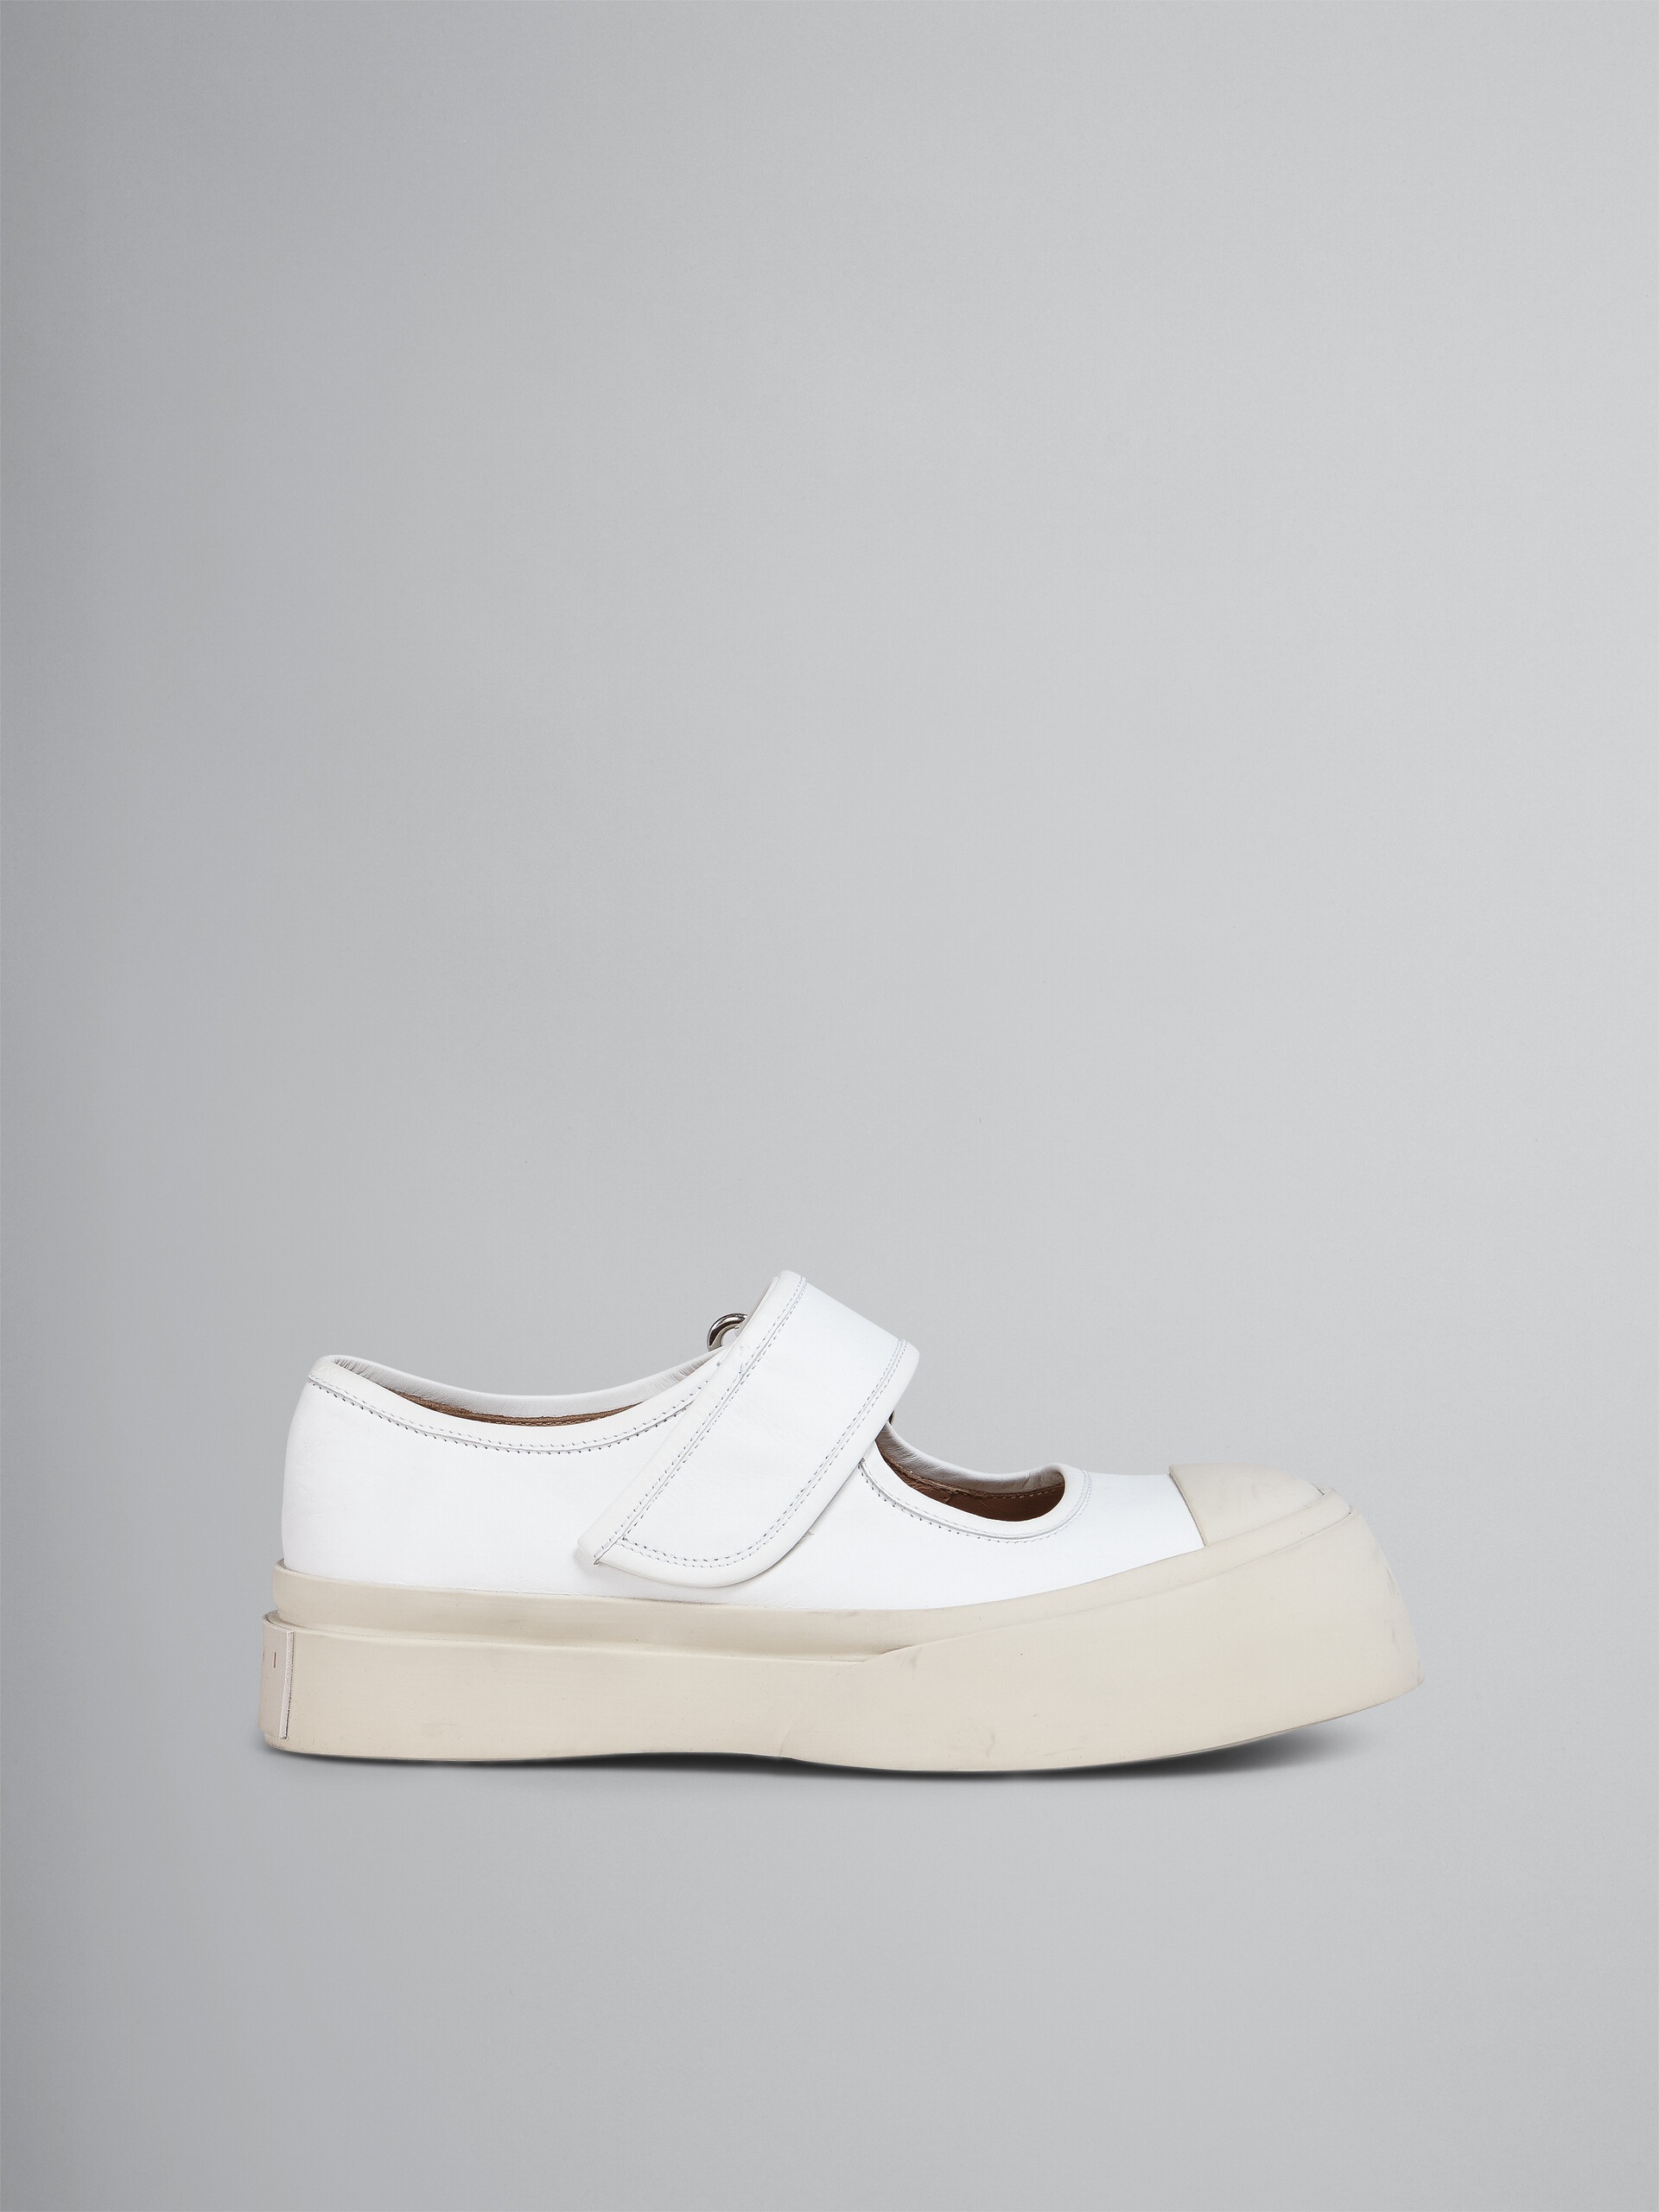 WHITE CALF LEATHER PABLO MARY-JANE SNEAKER - 1